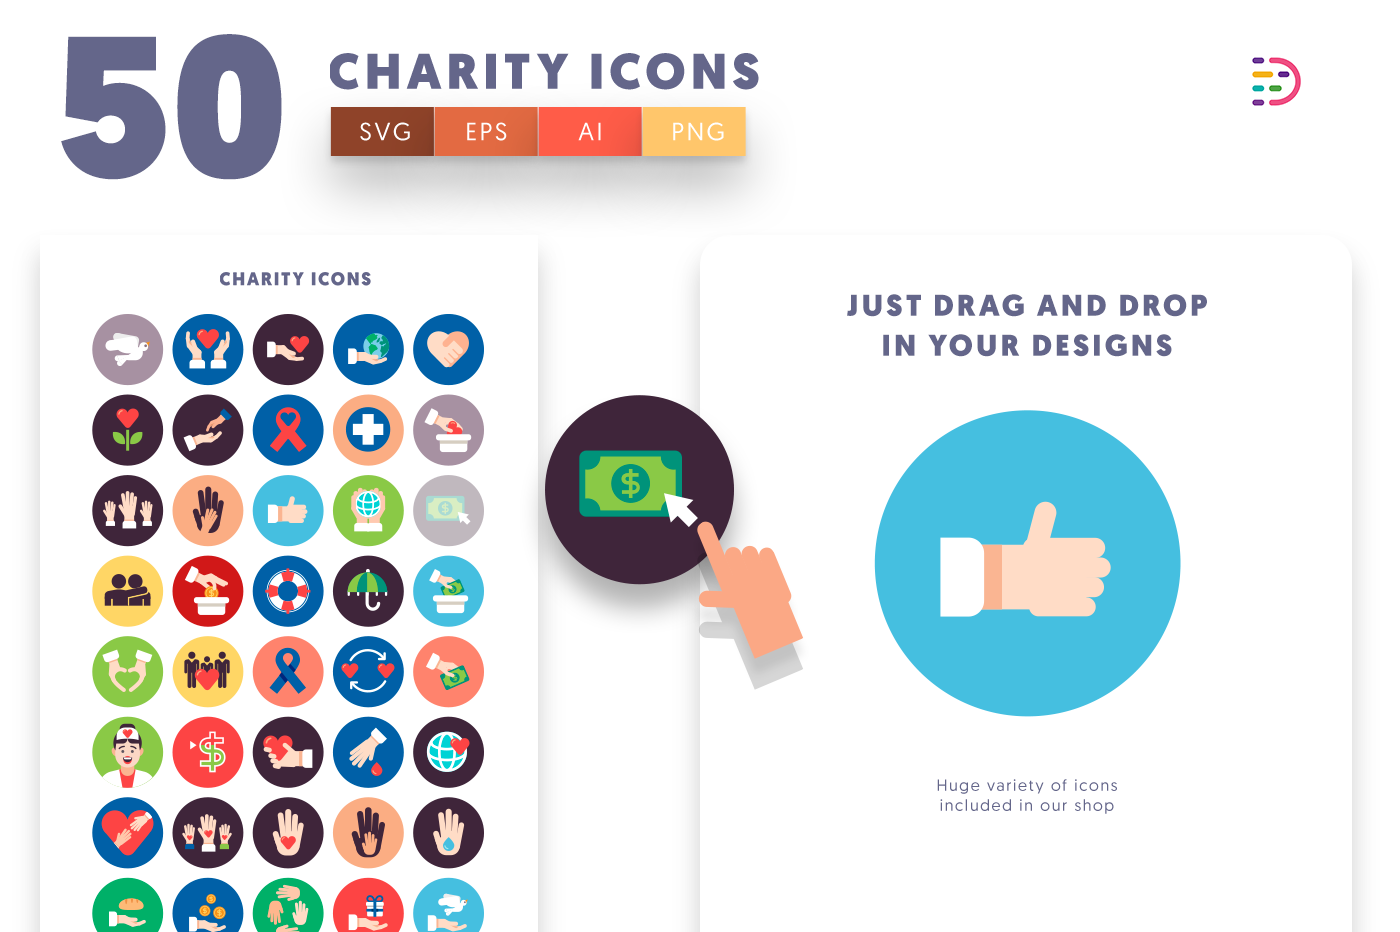 Design ready Charity Icons